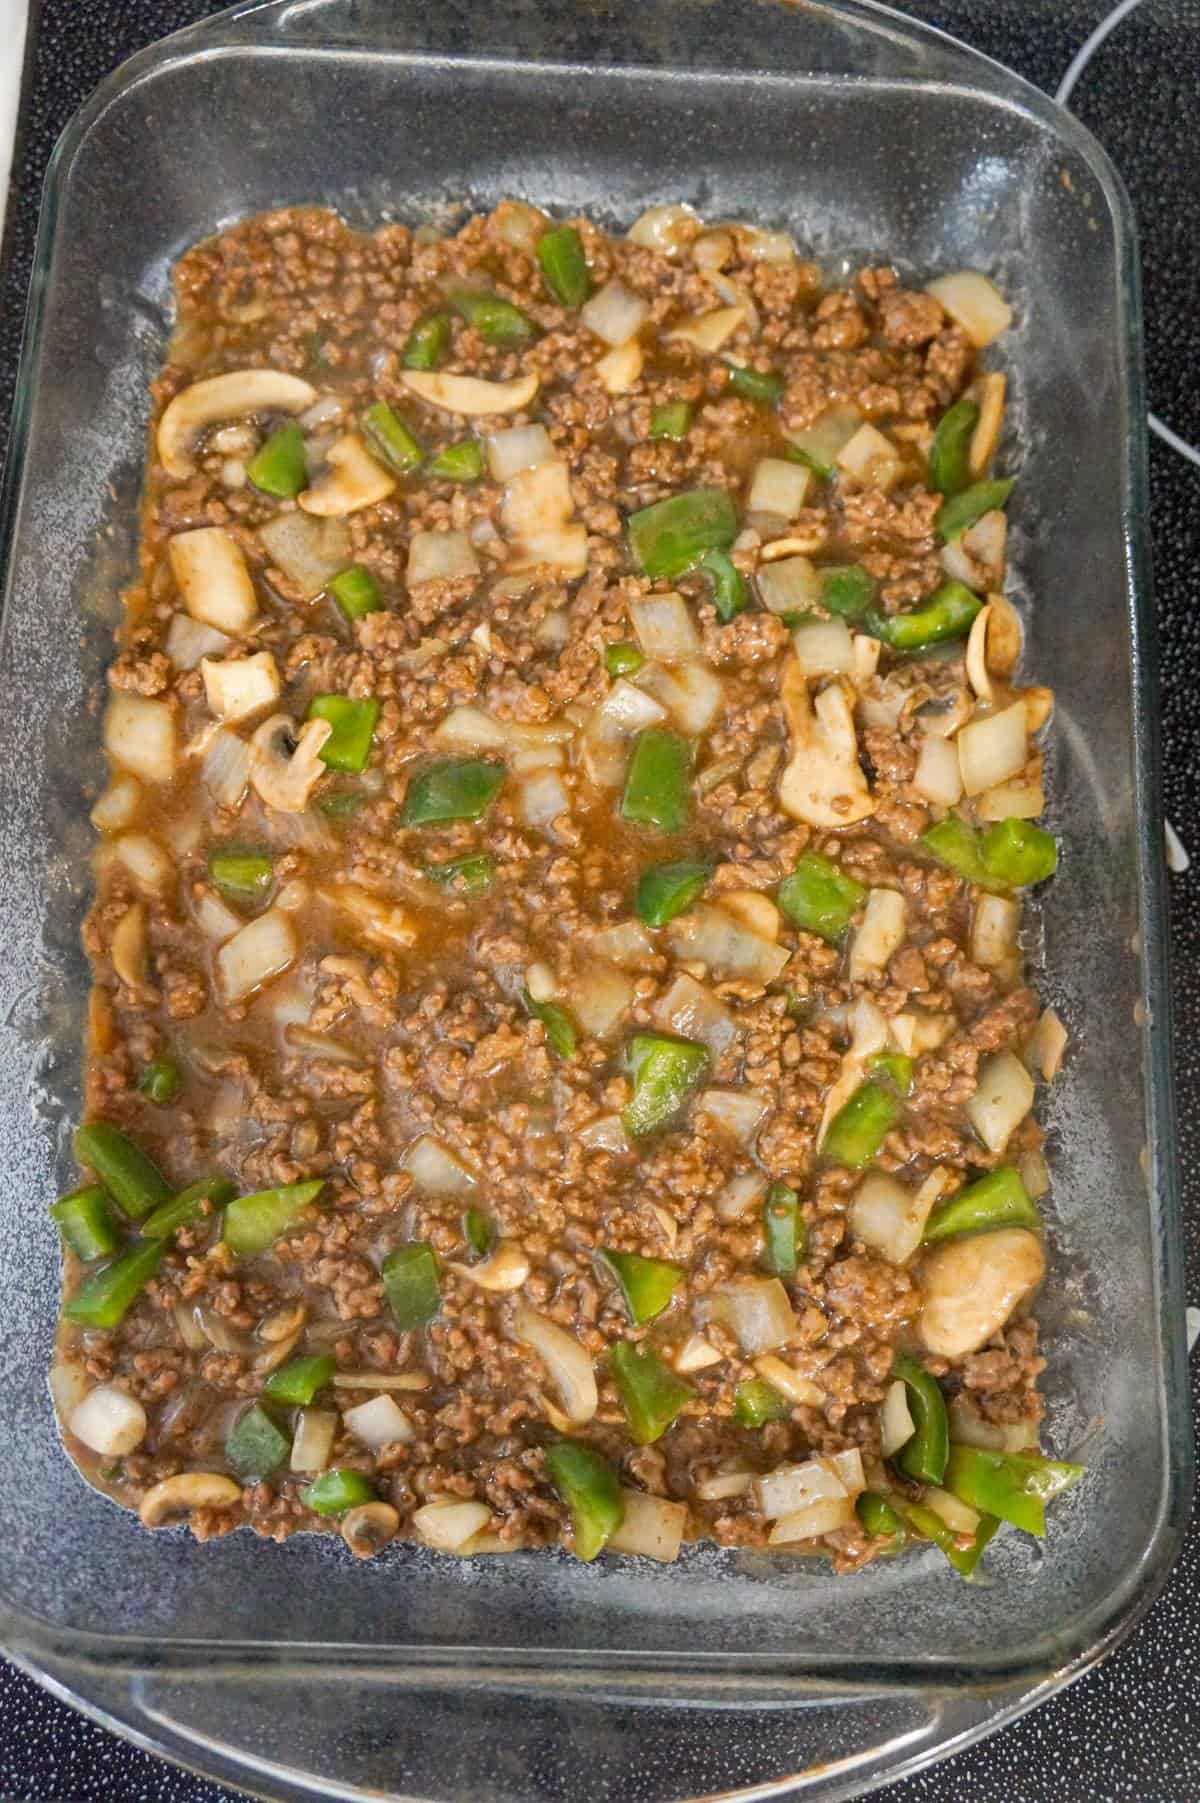 ground beef, green peppers and mushrooms mixture in a baking dish